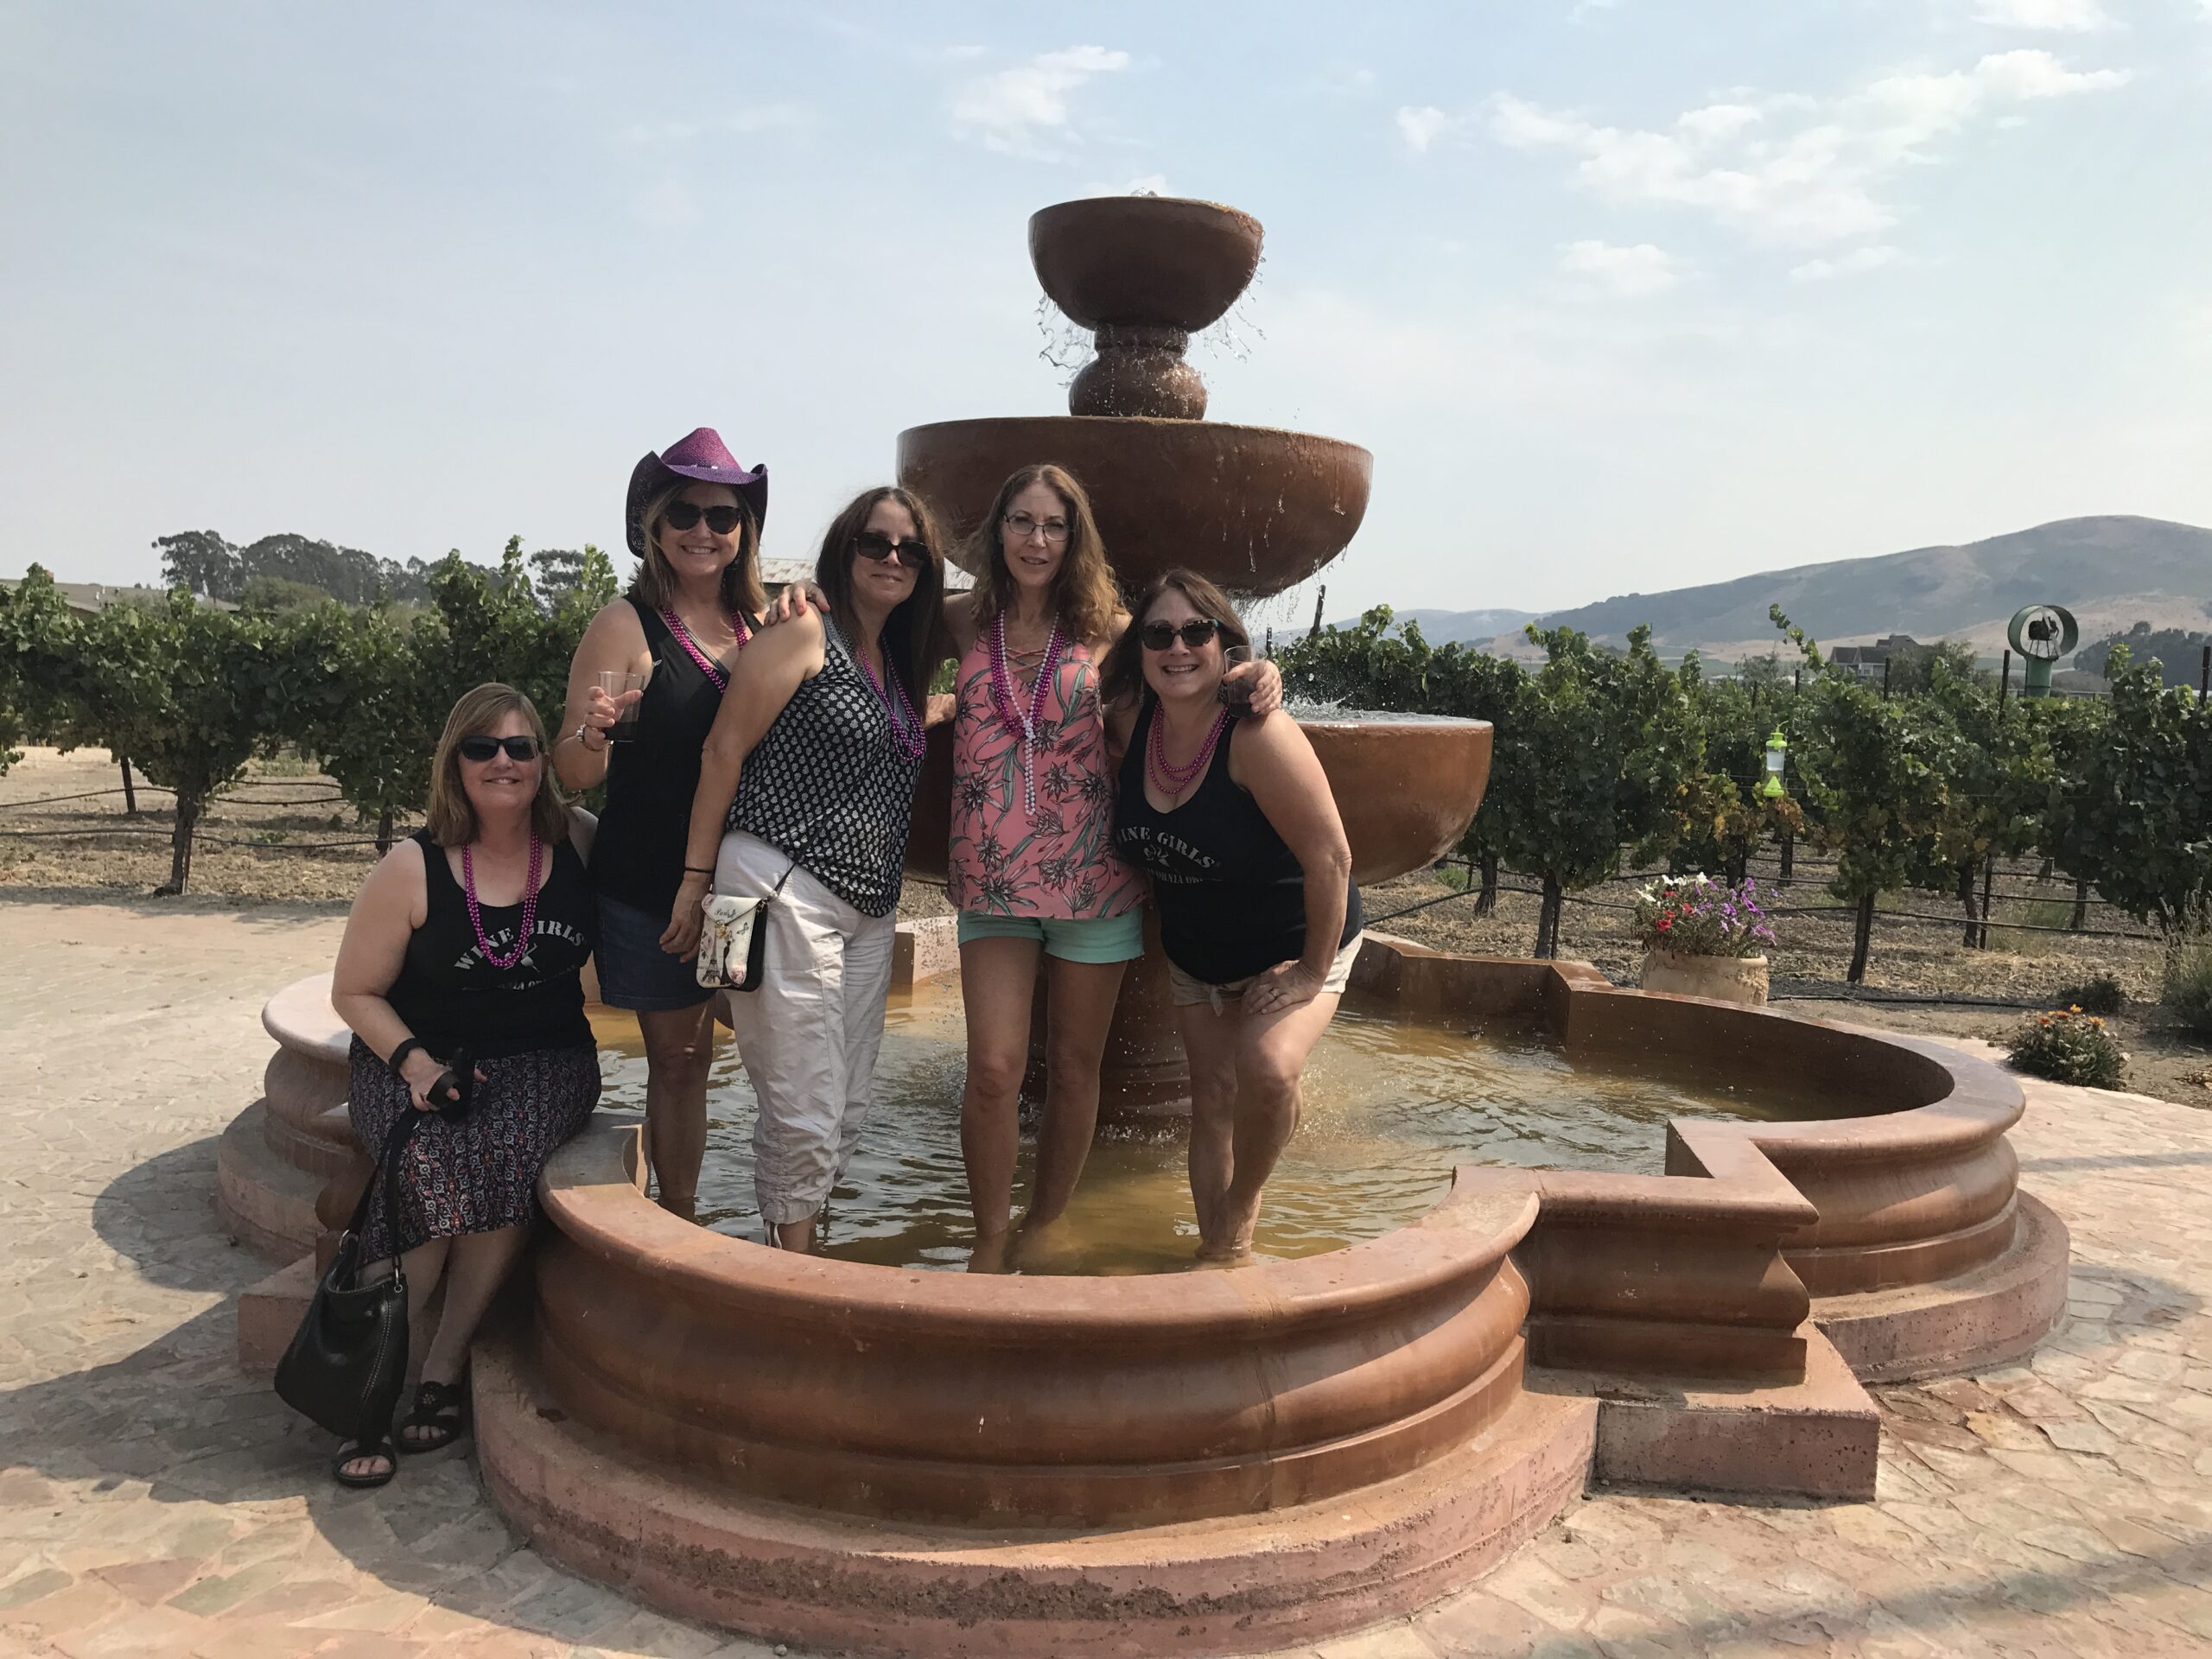 Some winegirls in a winery fountain